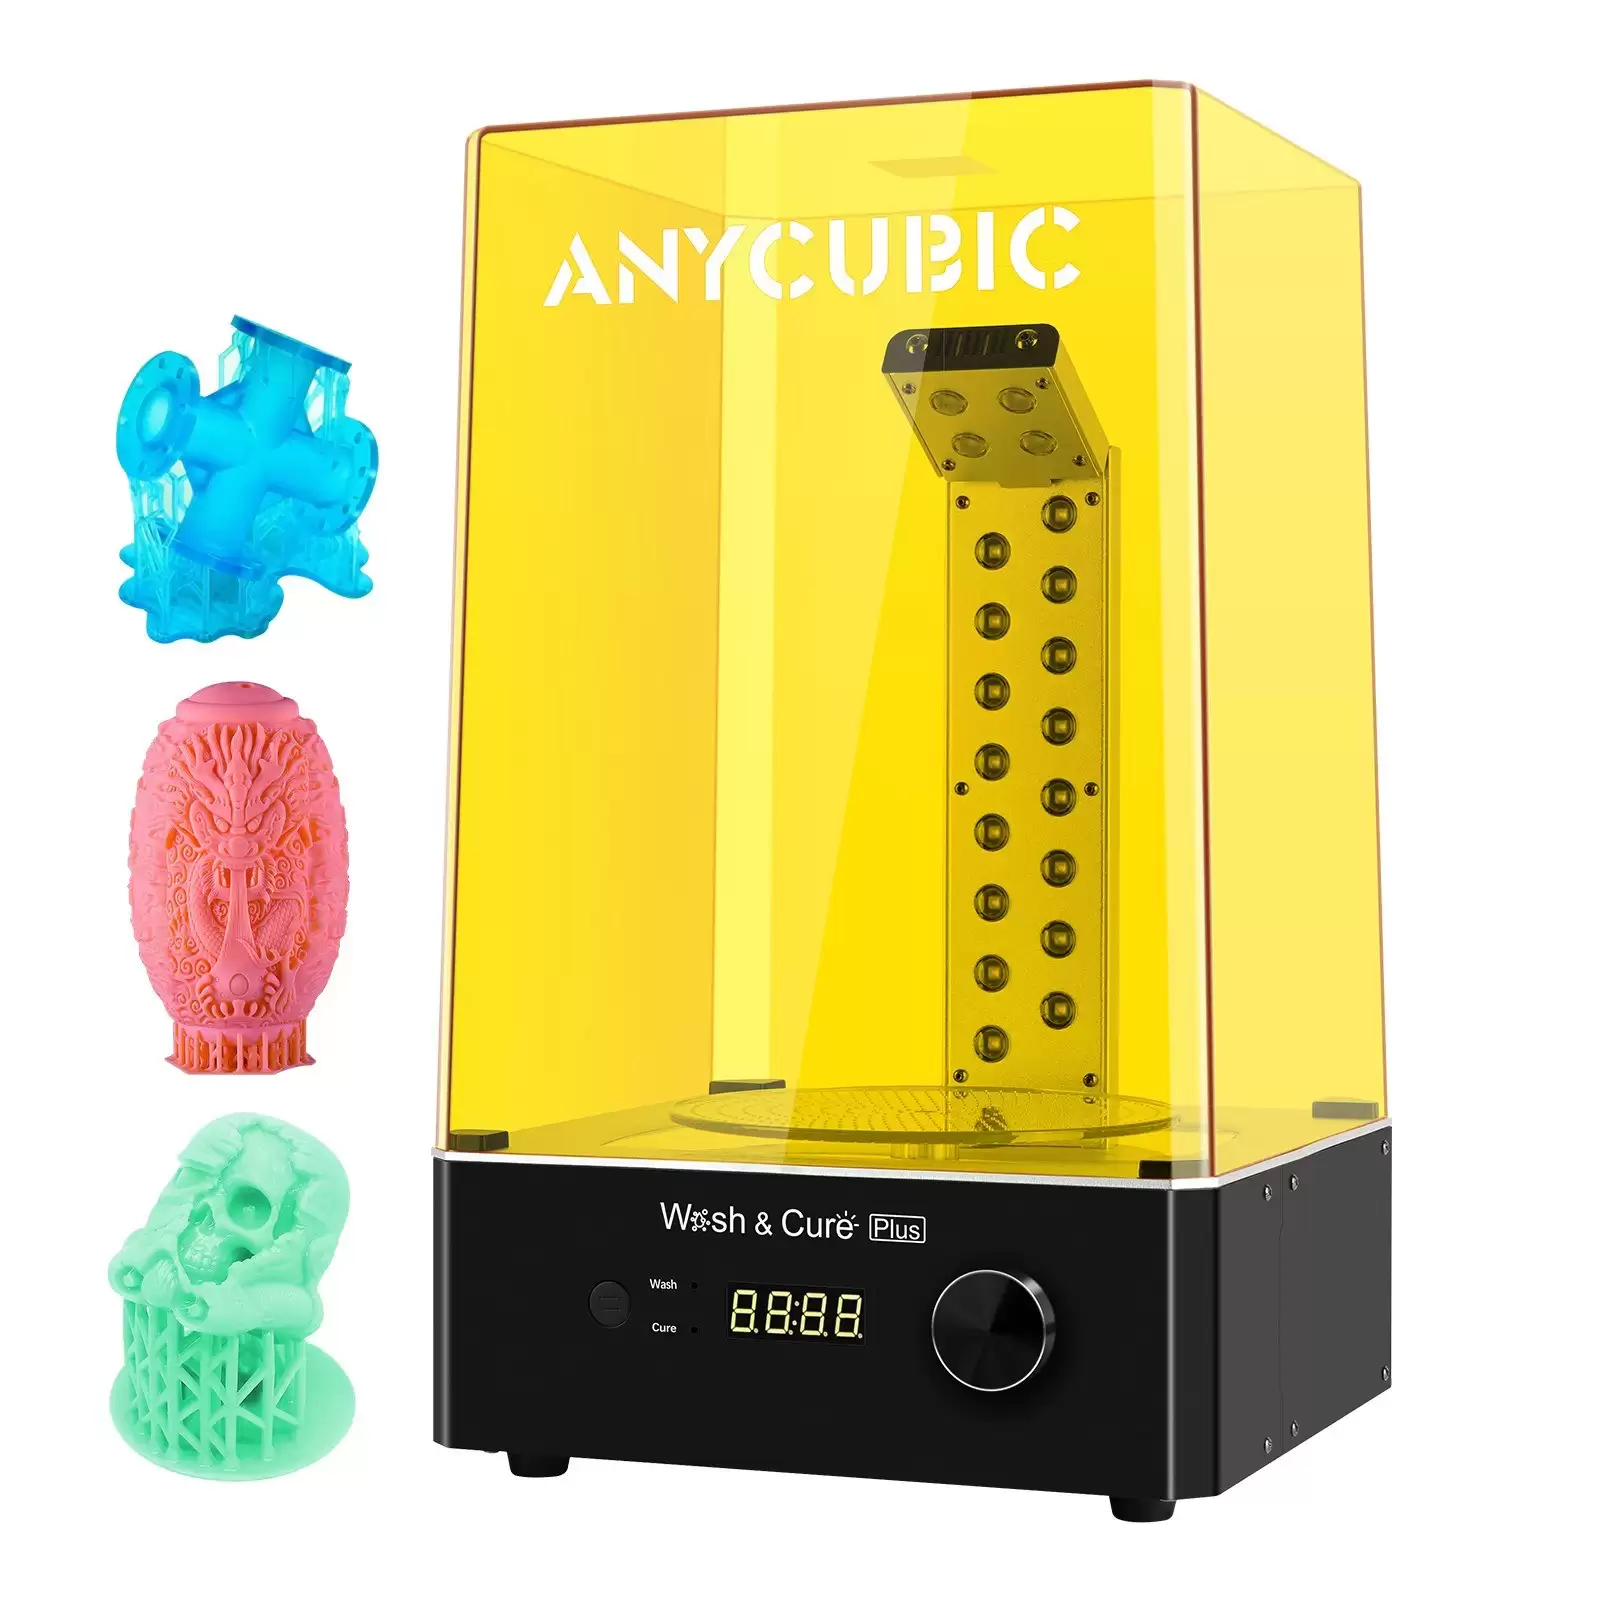 Order In Just $179.99 [Eu Warehouse] Original Anycubic Wash And Cure Plus Washing Curing 2 In 1 Machine At Tomtop